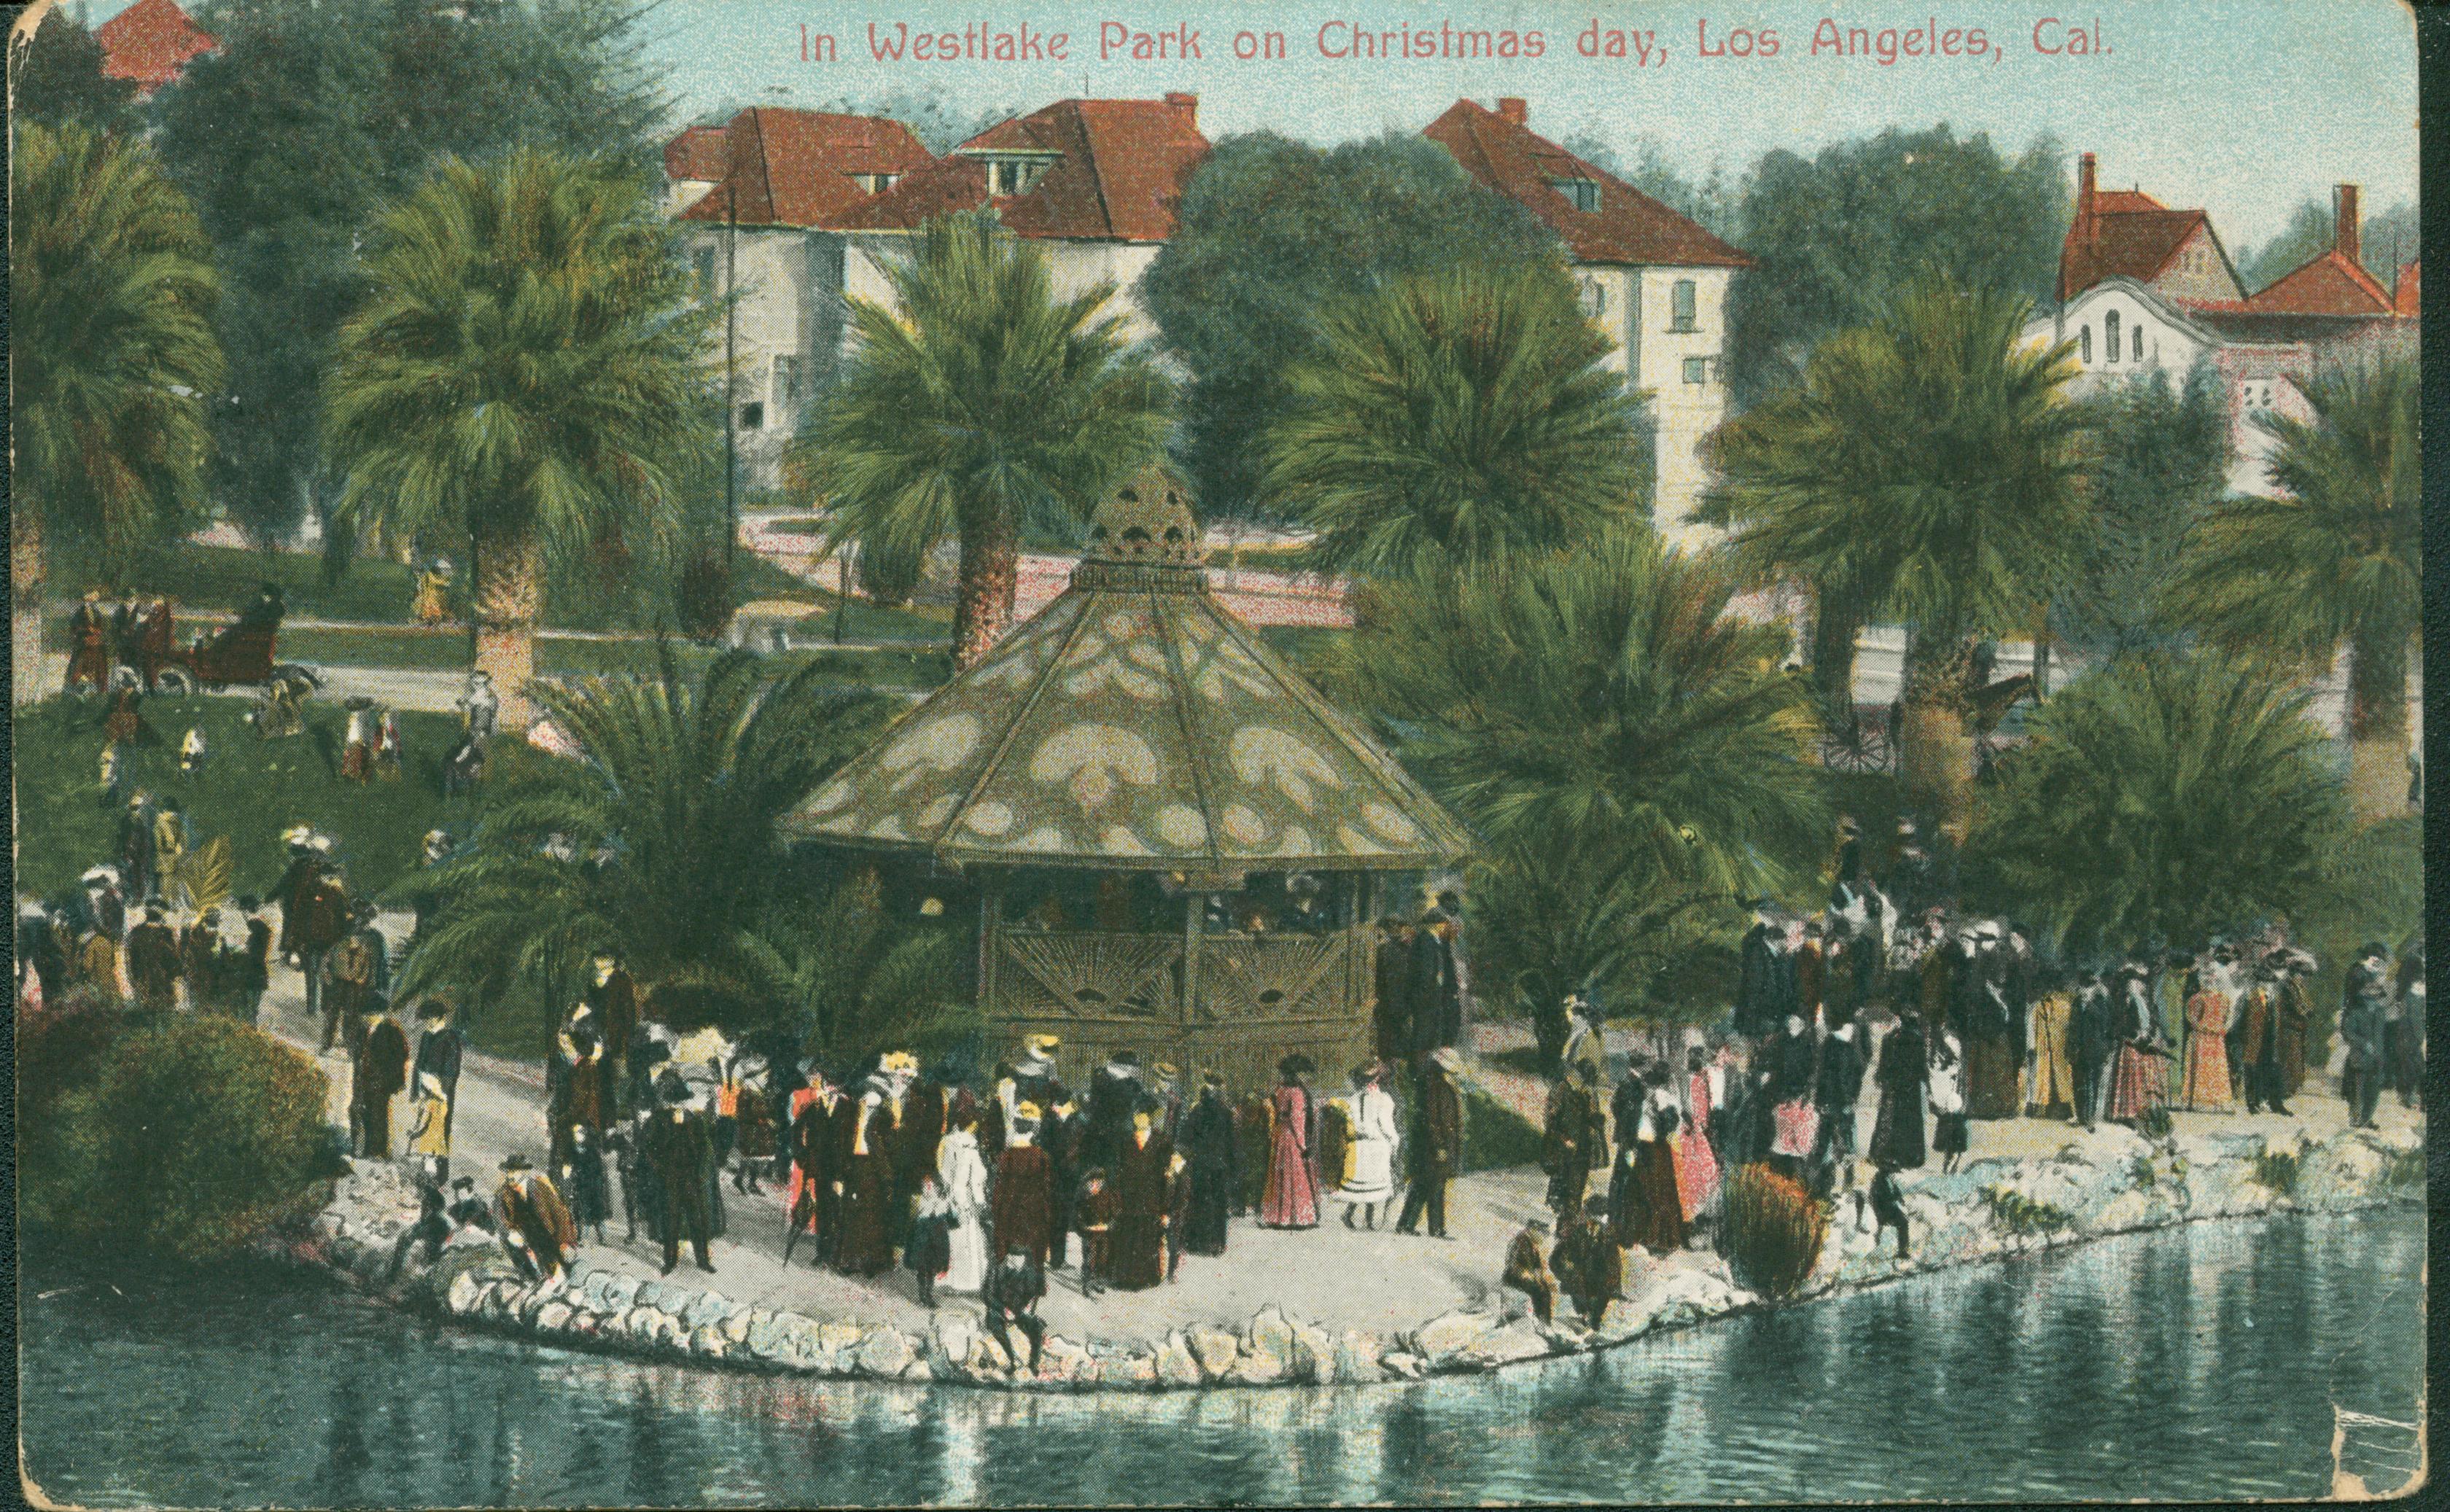 This postcard shows numerous people out strolling along the shores of a lake, past a gazebo